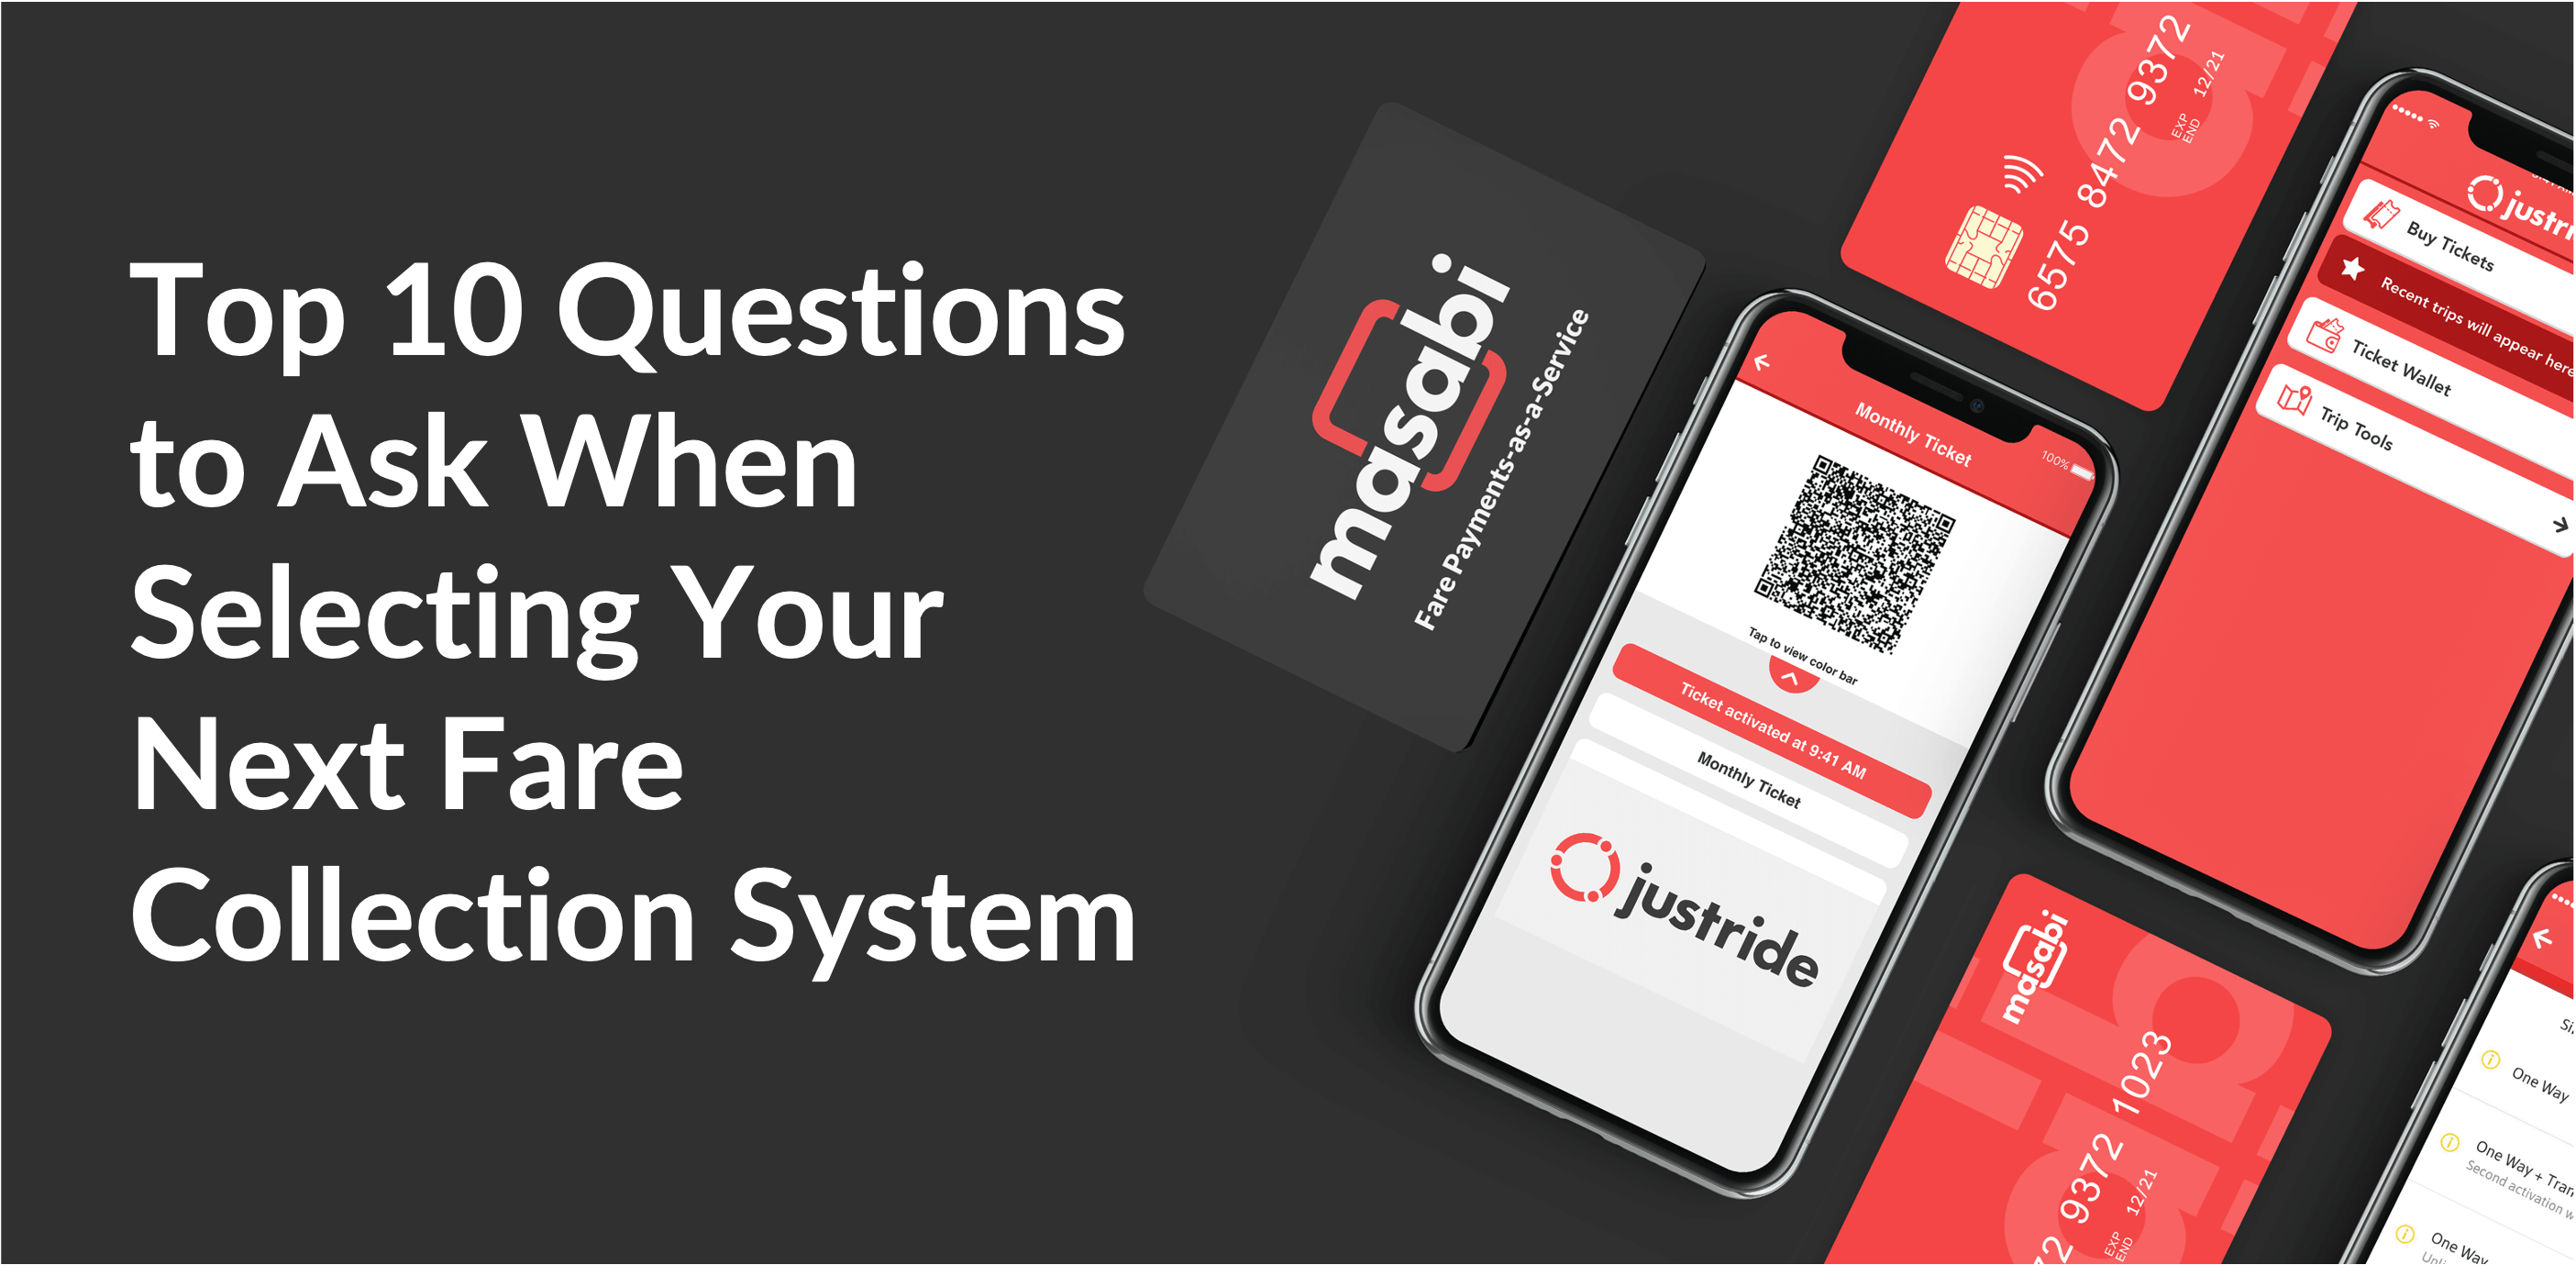 Top 10 Questions to Ask When Selecting Your Next Fare Collection System